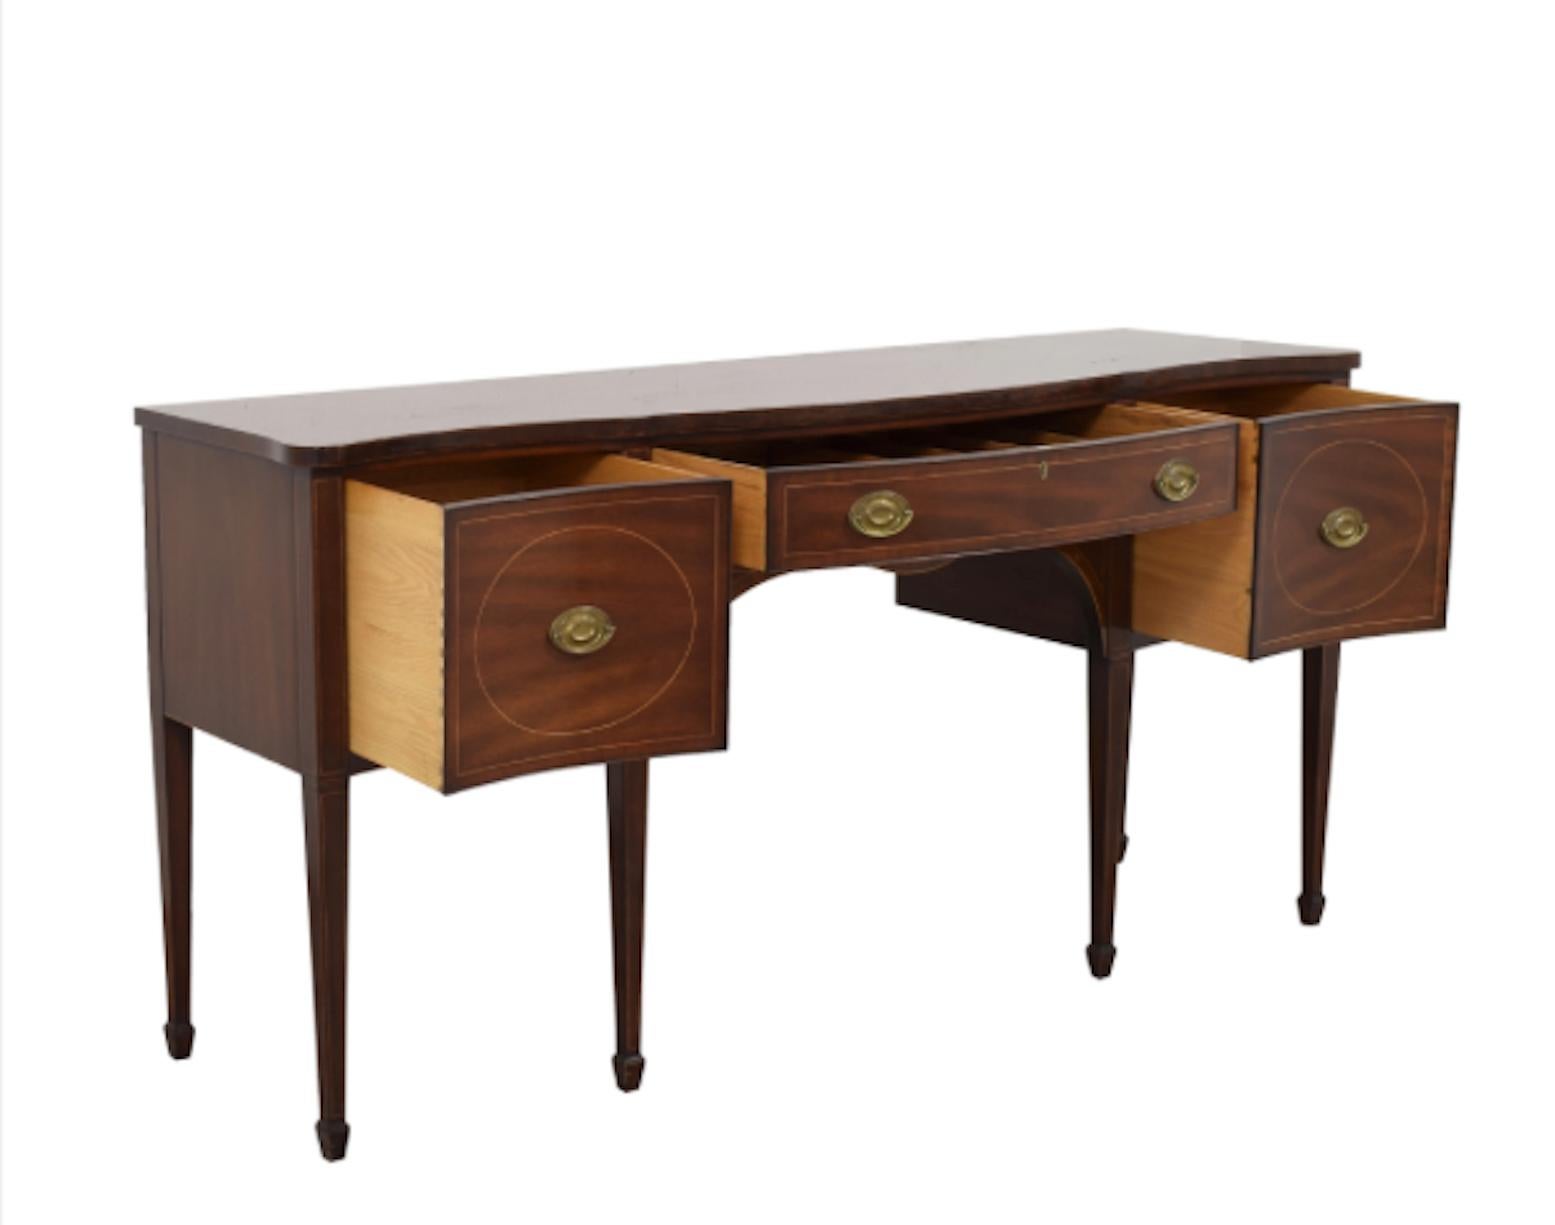 Kittinger extended Sheraton mahogany sideboard with wine drawers, bow-front, with key. 12 1/2